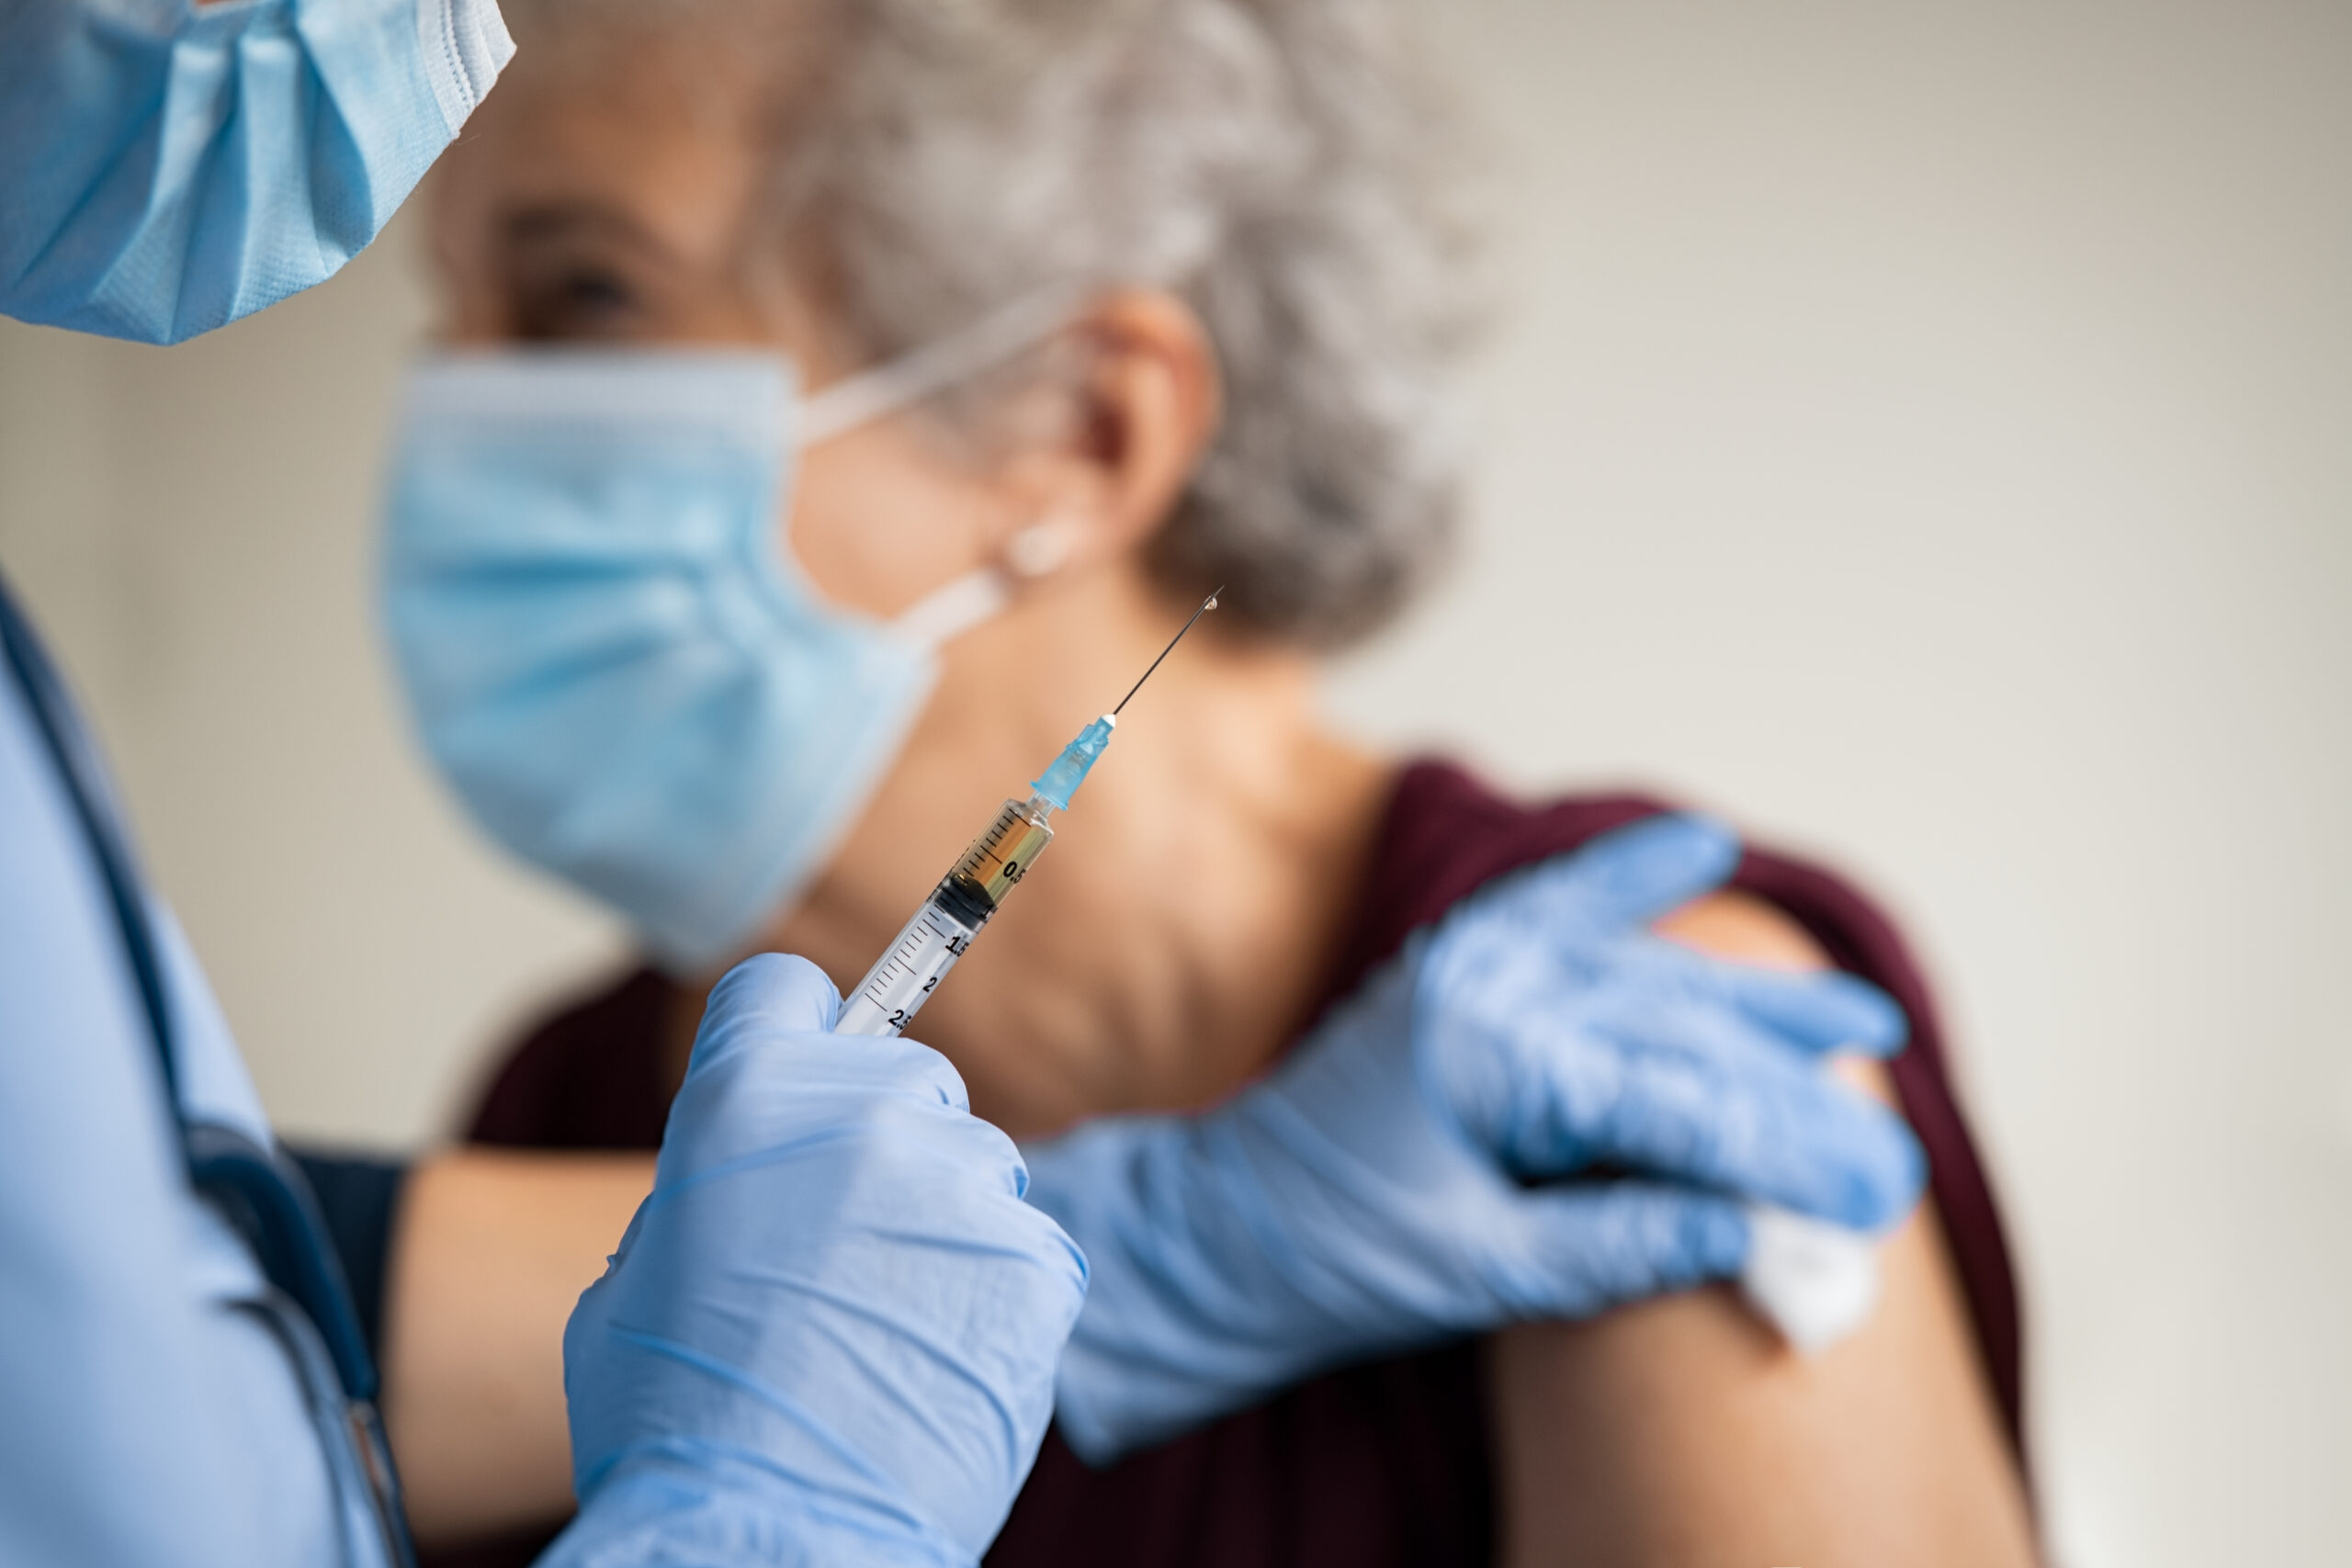 A closeup of a needle loaded with a vaccine, held in the hand of a medical professional wearing blue gloves. In the background, they are applying an alcohol swab to a grey-haired person who will receive the vaccine in their shoulder. There's increasing hesitancy where once there was widespread acceptance of vaccines in Texas.